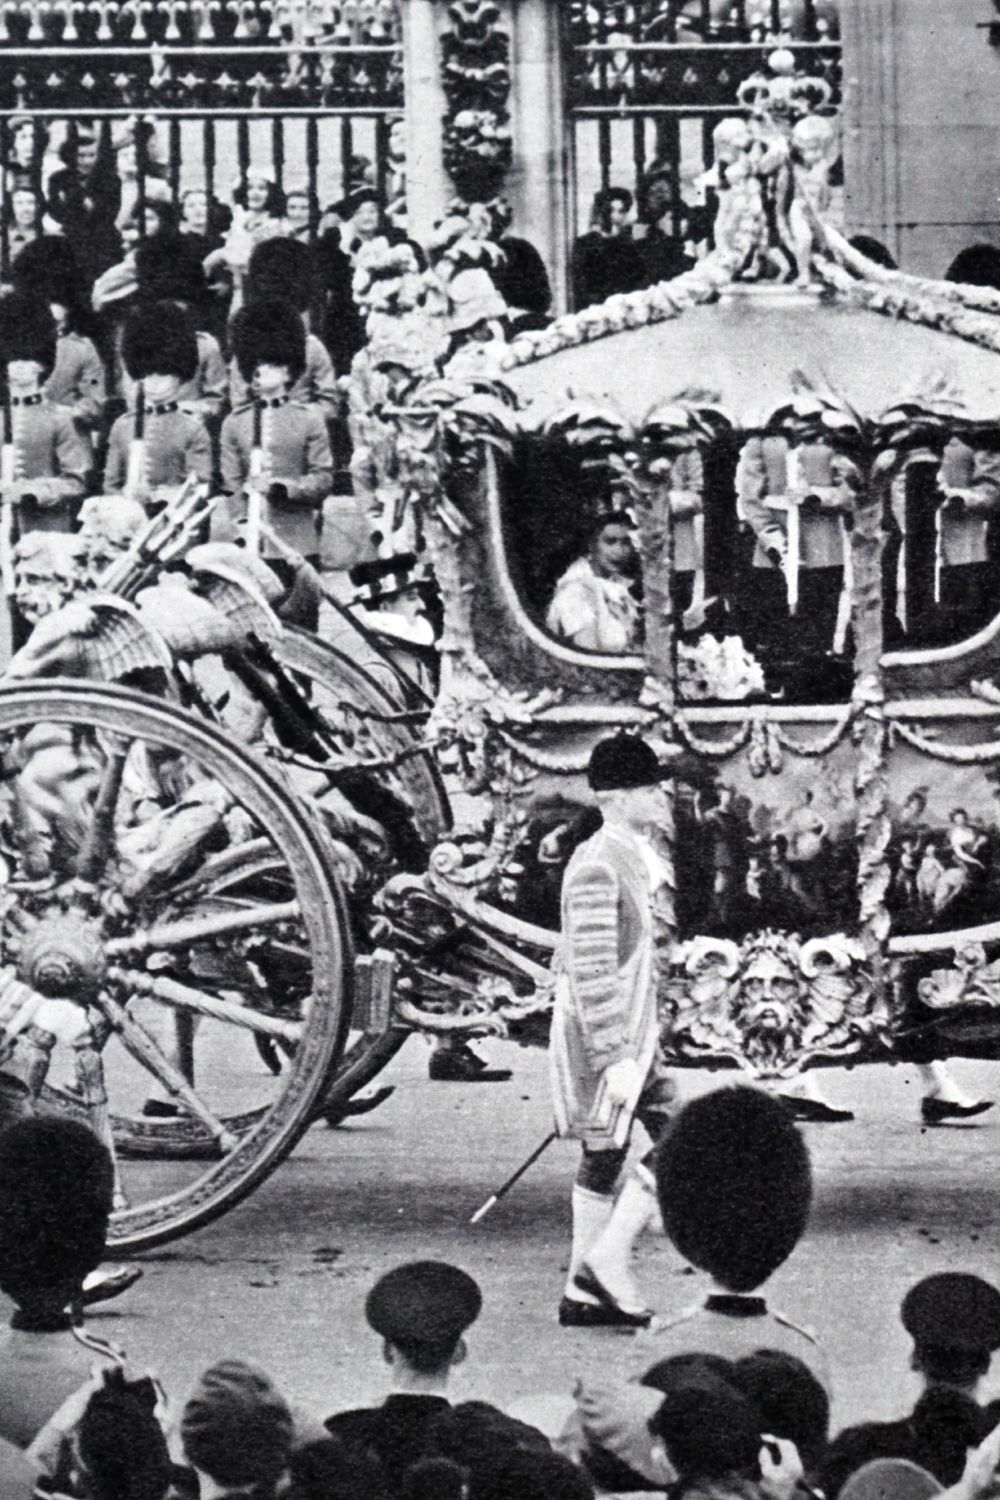 <p>                     The Queen described her ride to Westminster Abbey in the Gold State Coach as "horrible" as it was so uncomfortable, explaining, "It’s only sprung on leather" (via <a href="https://www.itv.com/news/2023-05-05/coronation-king-to-travel-in-grand-but-uncomfortable-gold-state-coach">ITV</a>). The grand coach was drawn by eight horses called Cunningham, Tovey, Noah, Tedder, Eisenhower, Snow White, Tipperary and McCreery.                   </p>